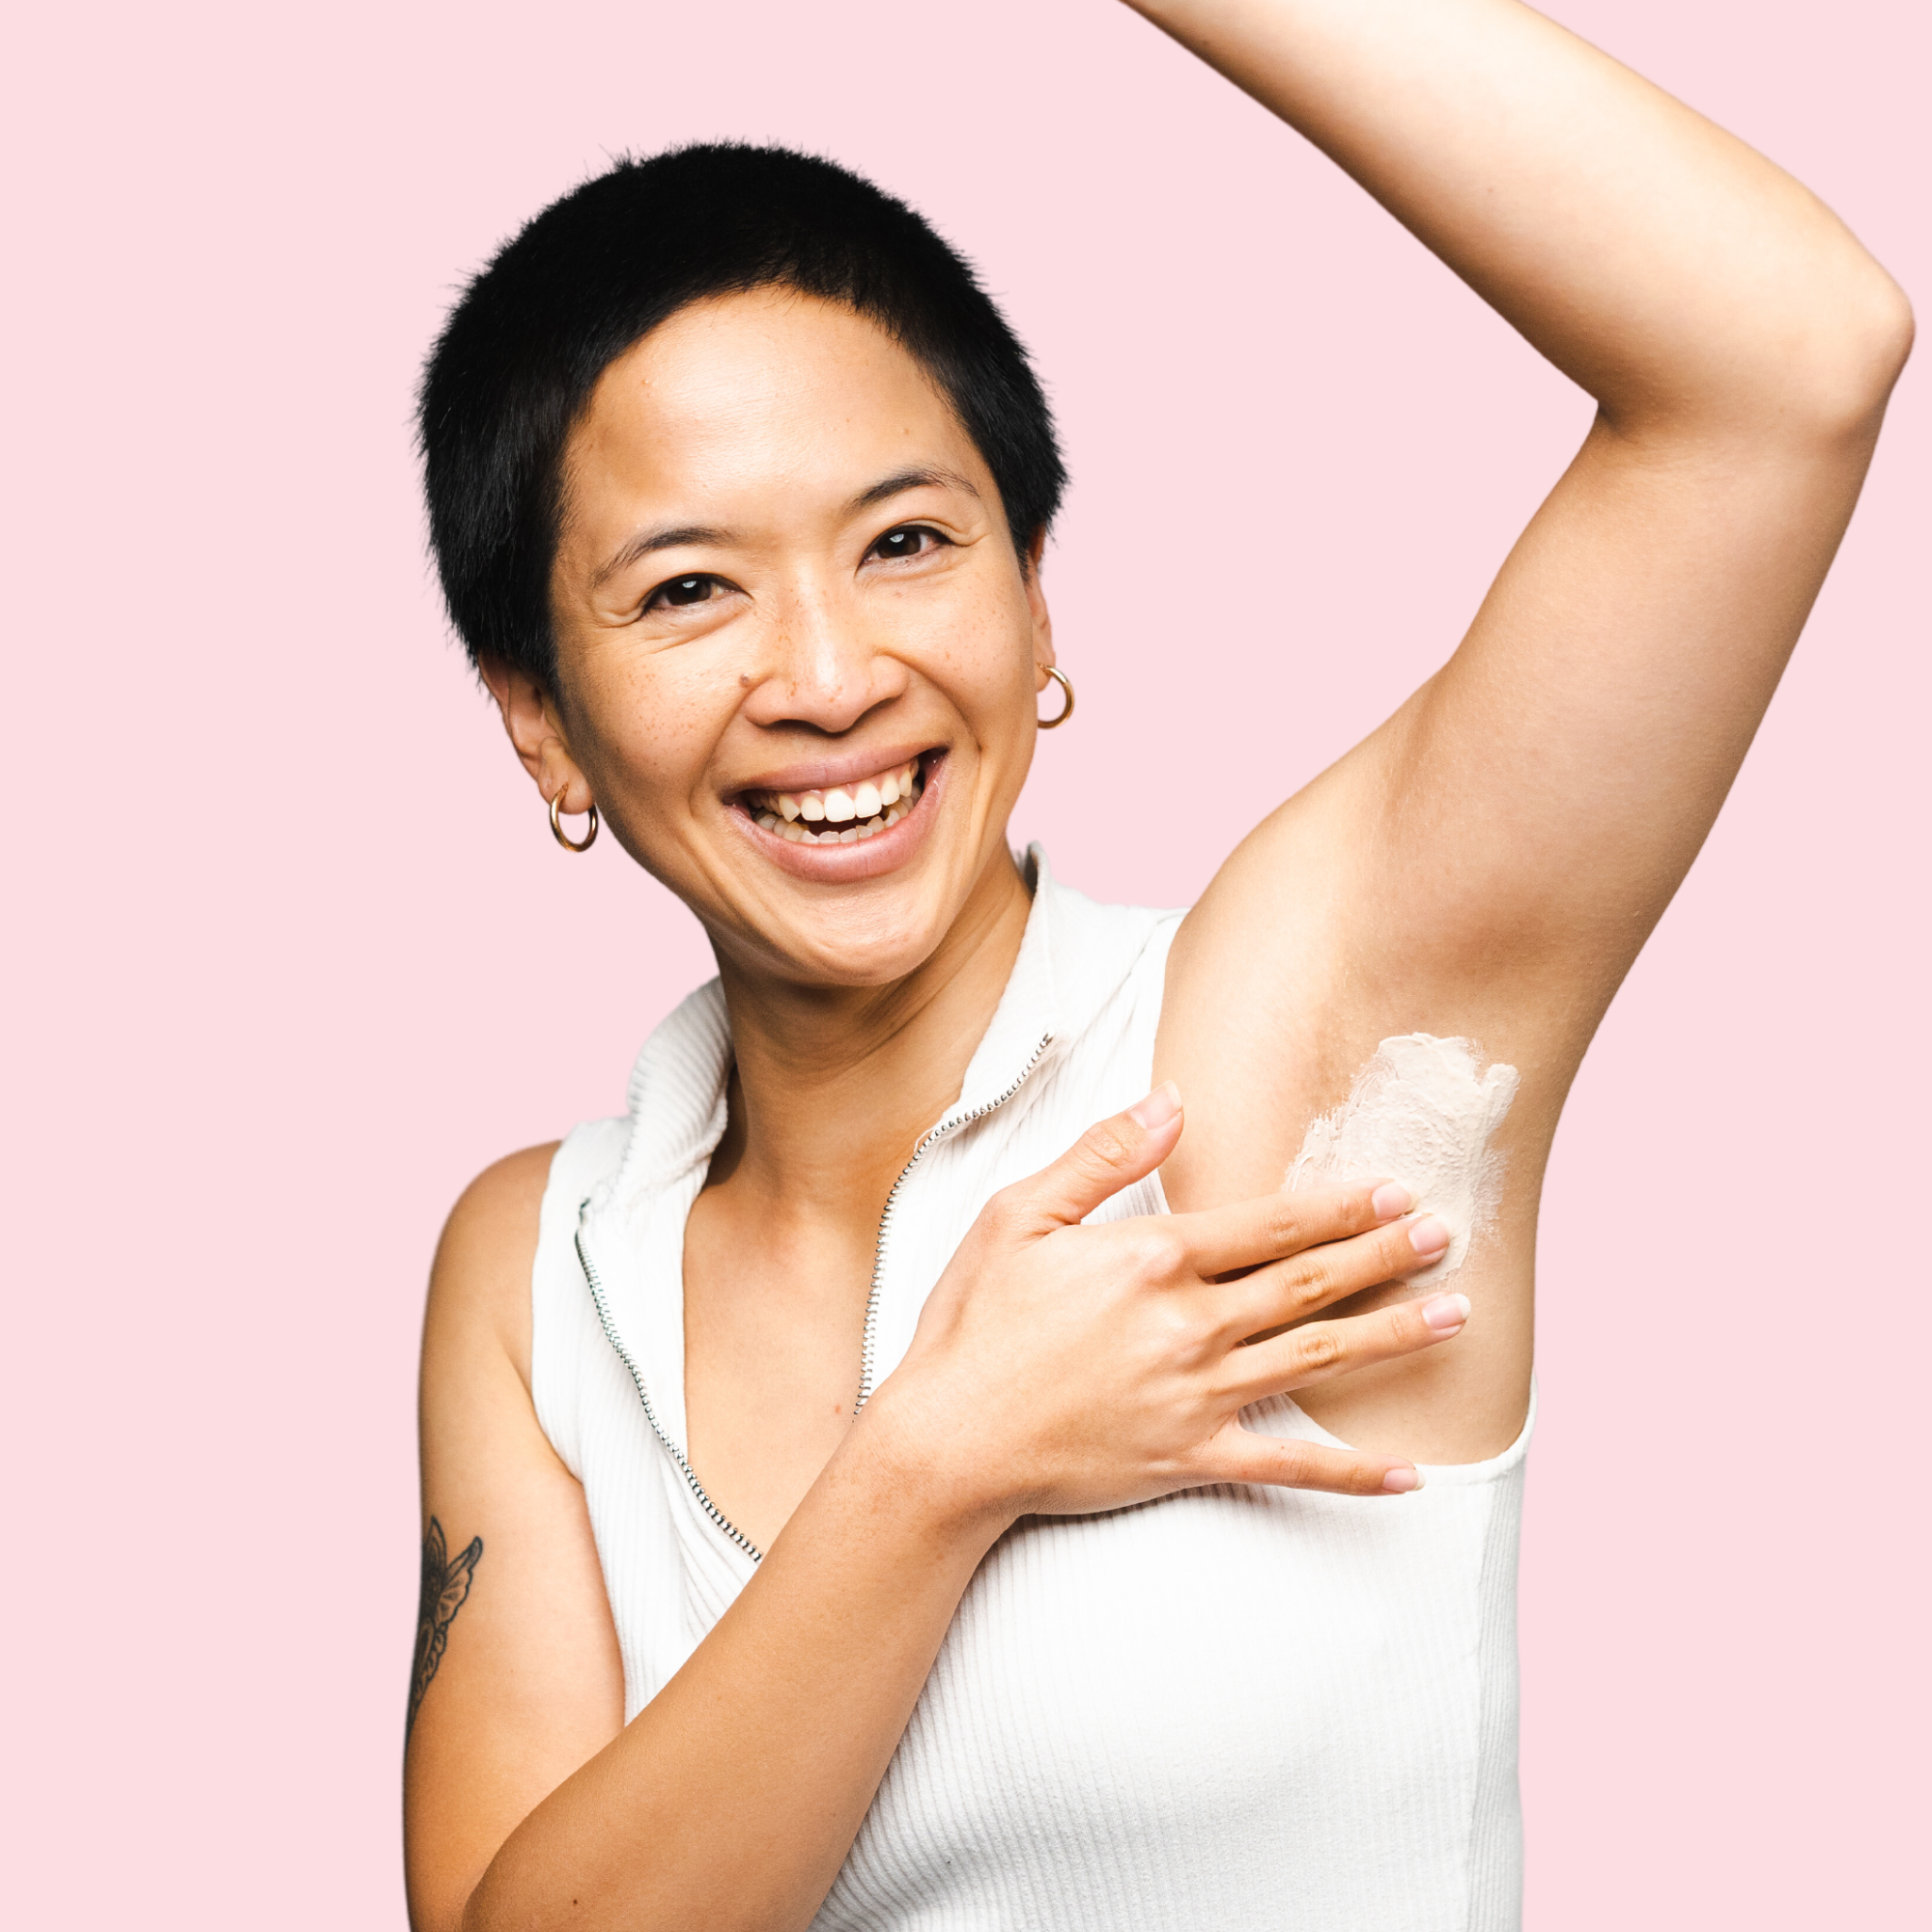 lady smiling at camera with left arm raised over her head applying woohoo armpit detox mask to armpit